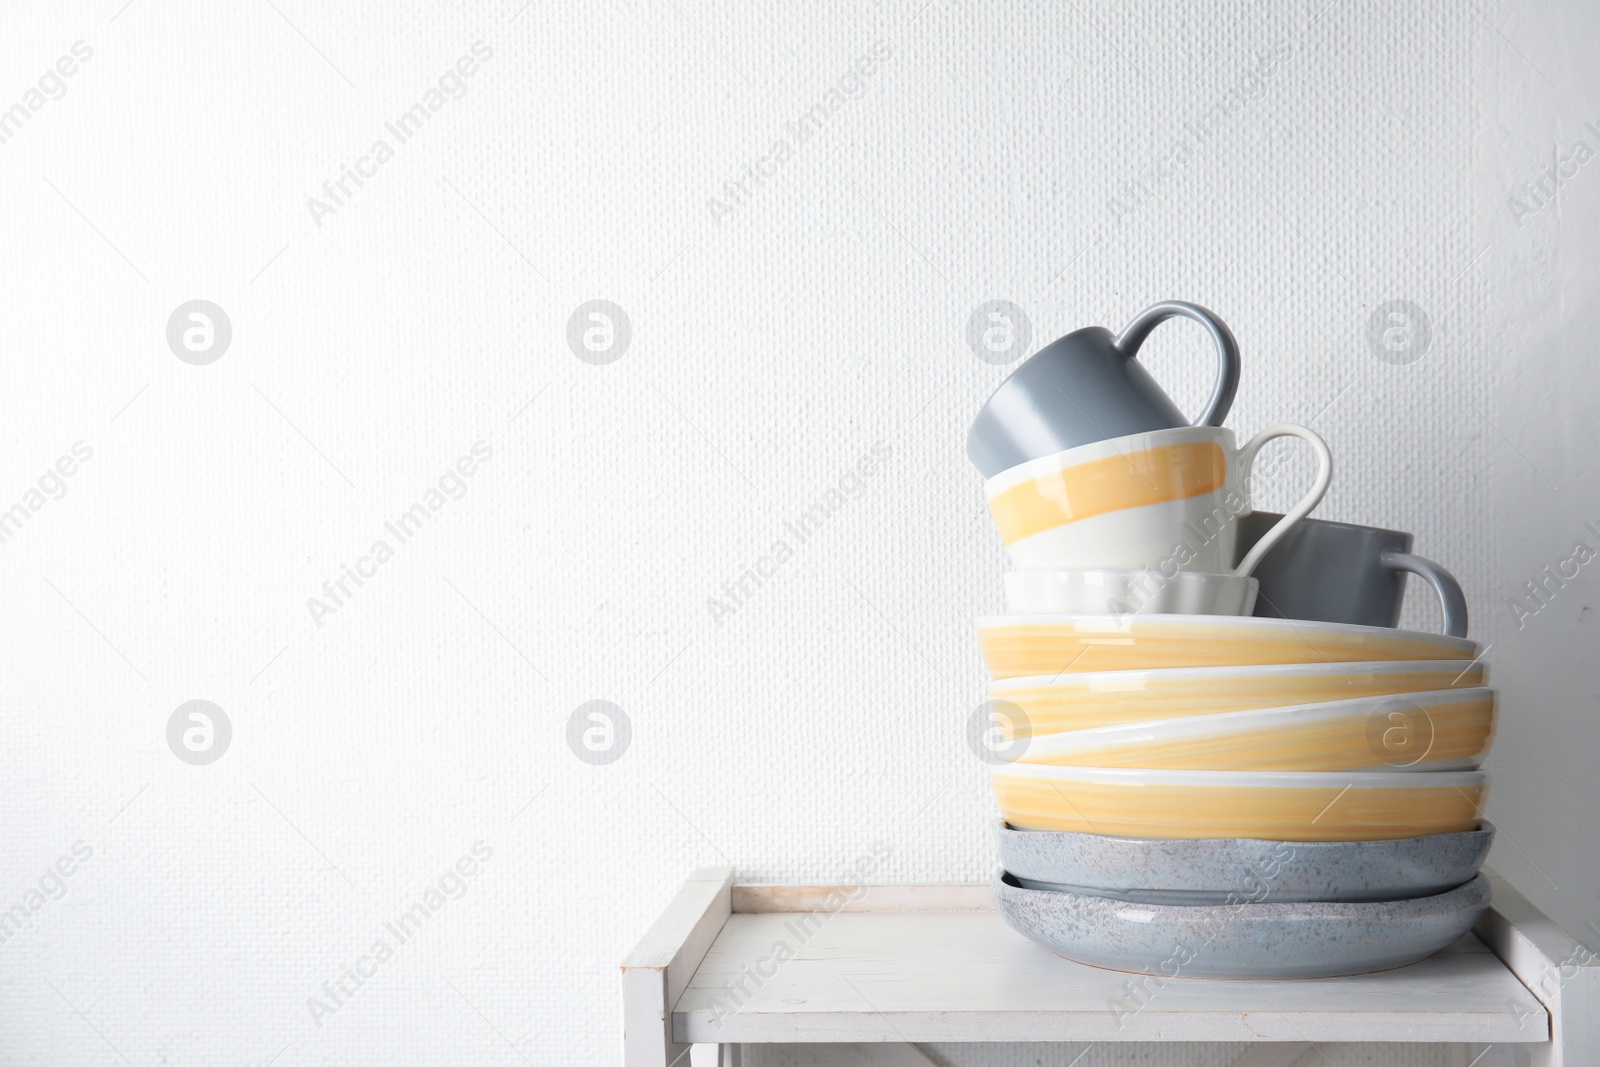 Photo of Set of dinnerware on table against light background with space for text. Interior element